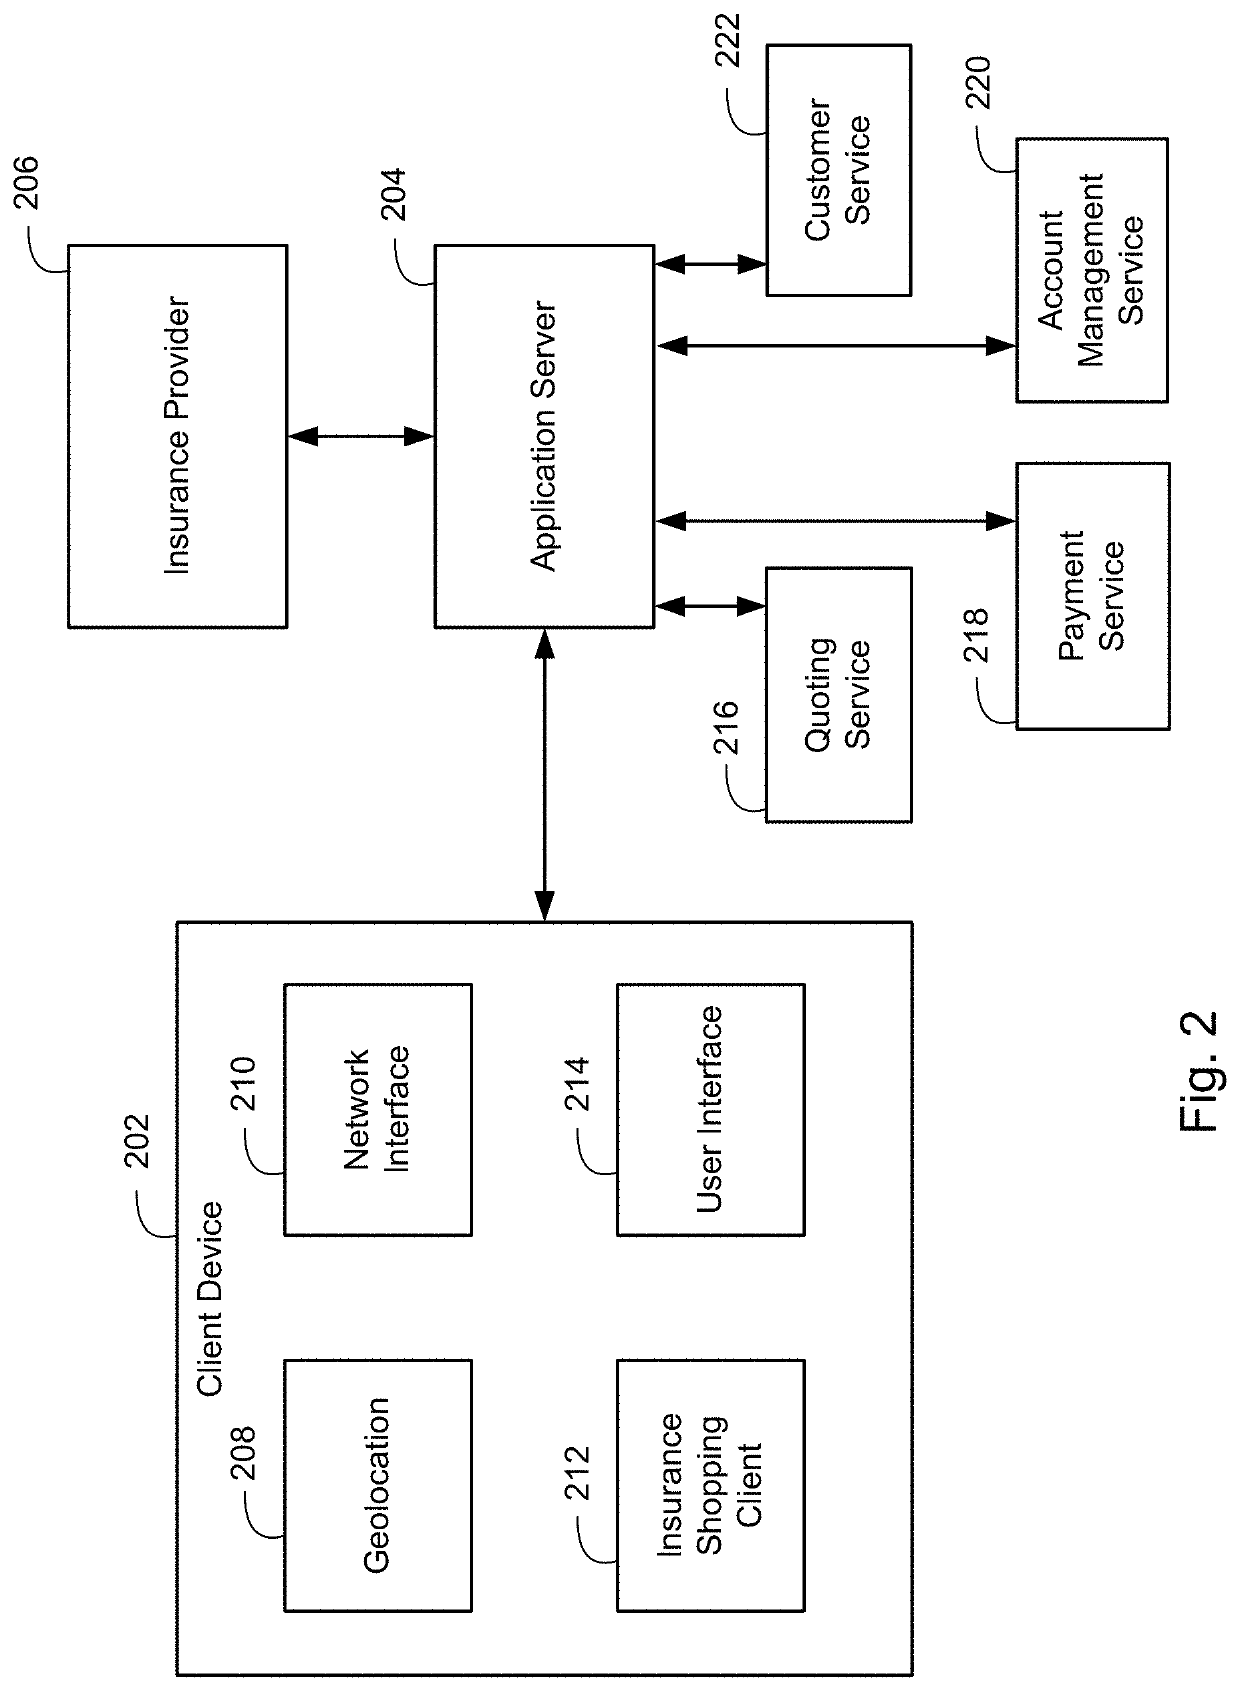 Mobile application and system for connecting users to carriers to facilitate availability of short-term, on-demand insurance